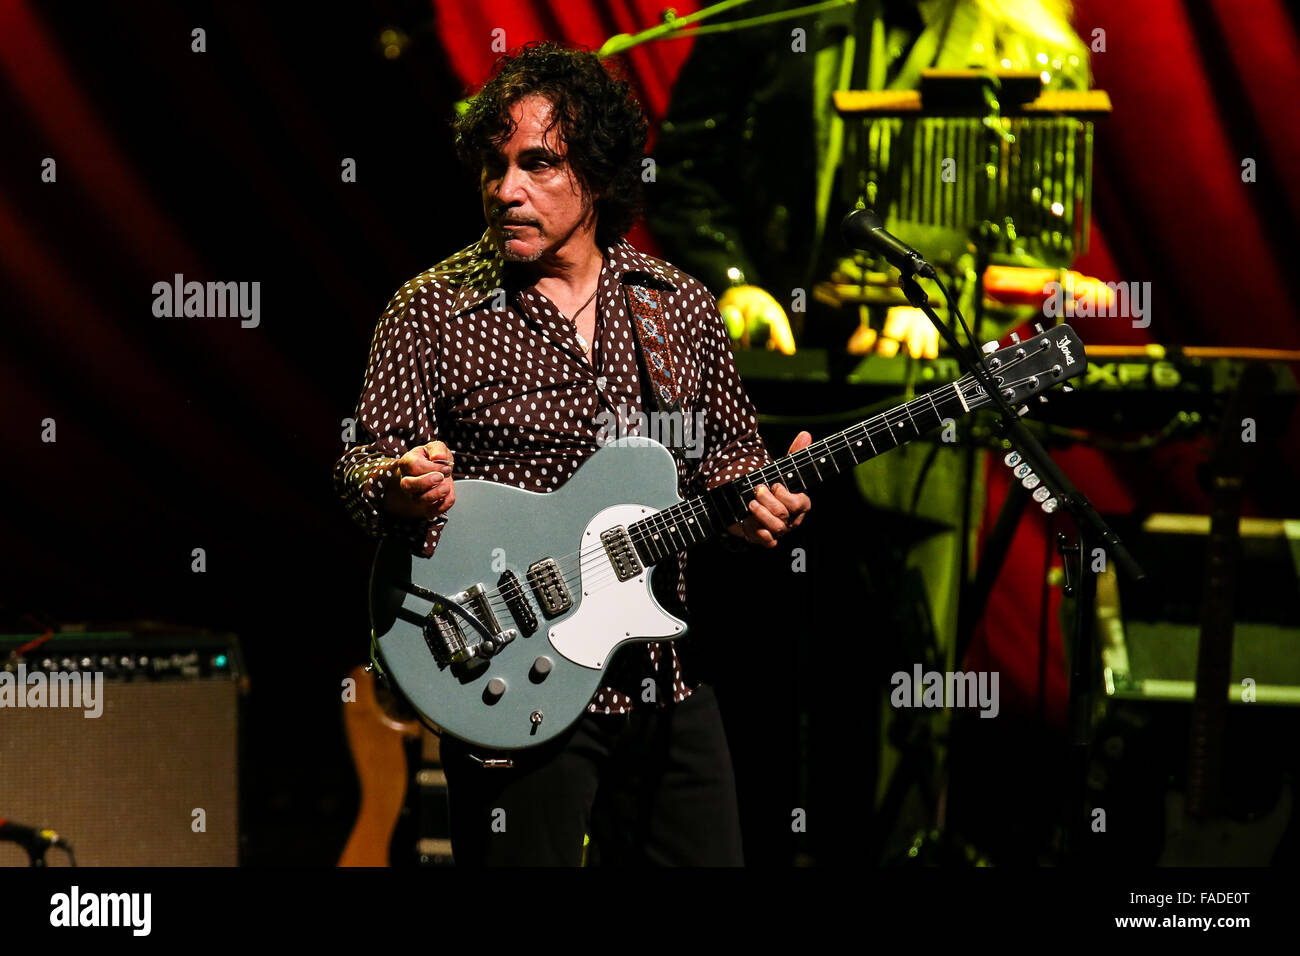 Daryl Hall and John Oates perform in Concert Stock Photo